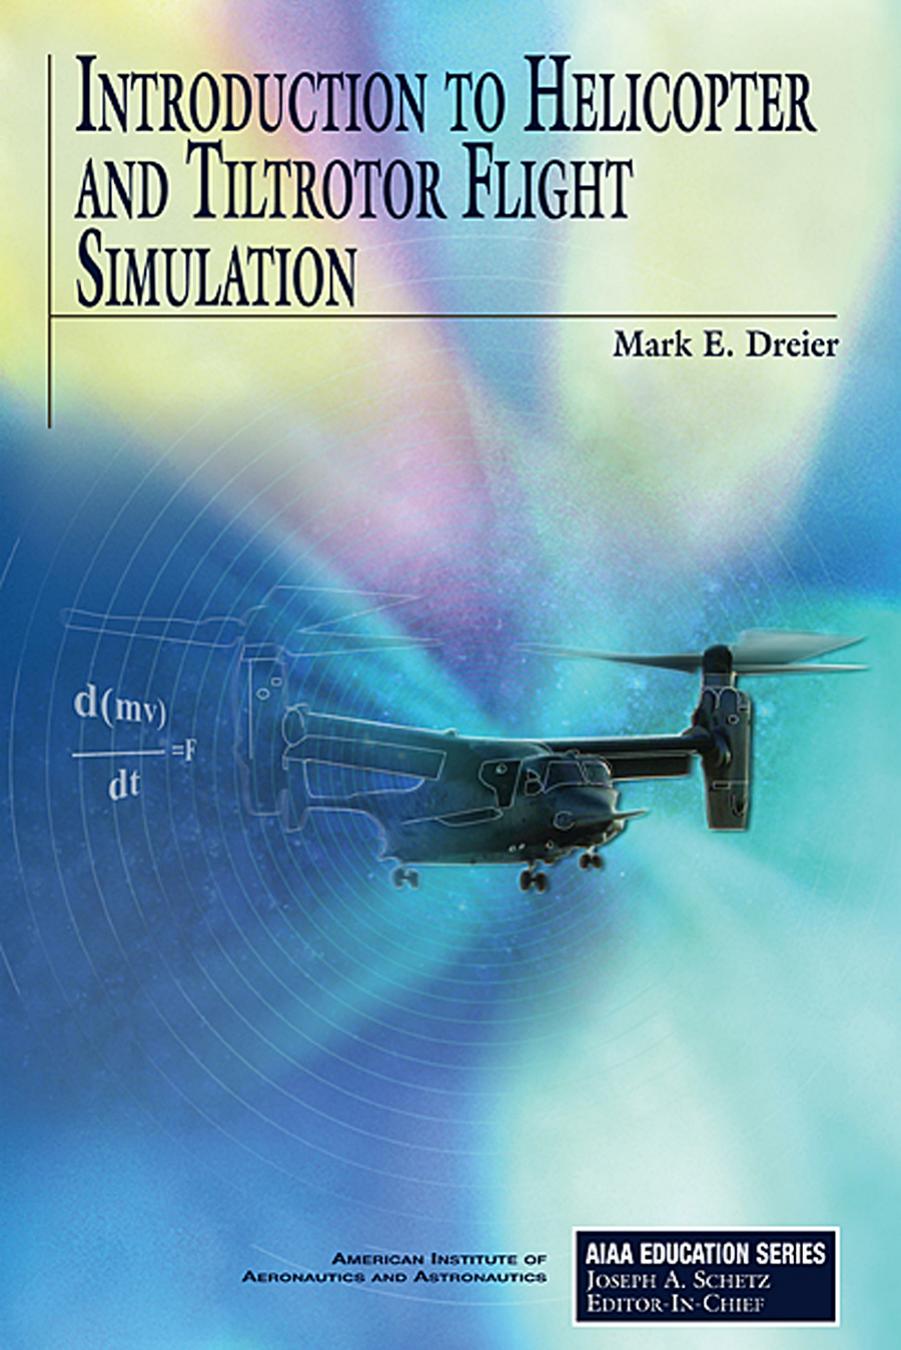 Introduction to Helicopter and Tiltrotor Simulation by Mark E. Dreier